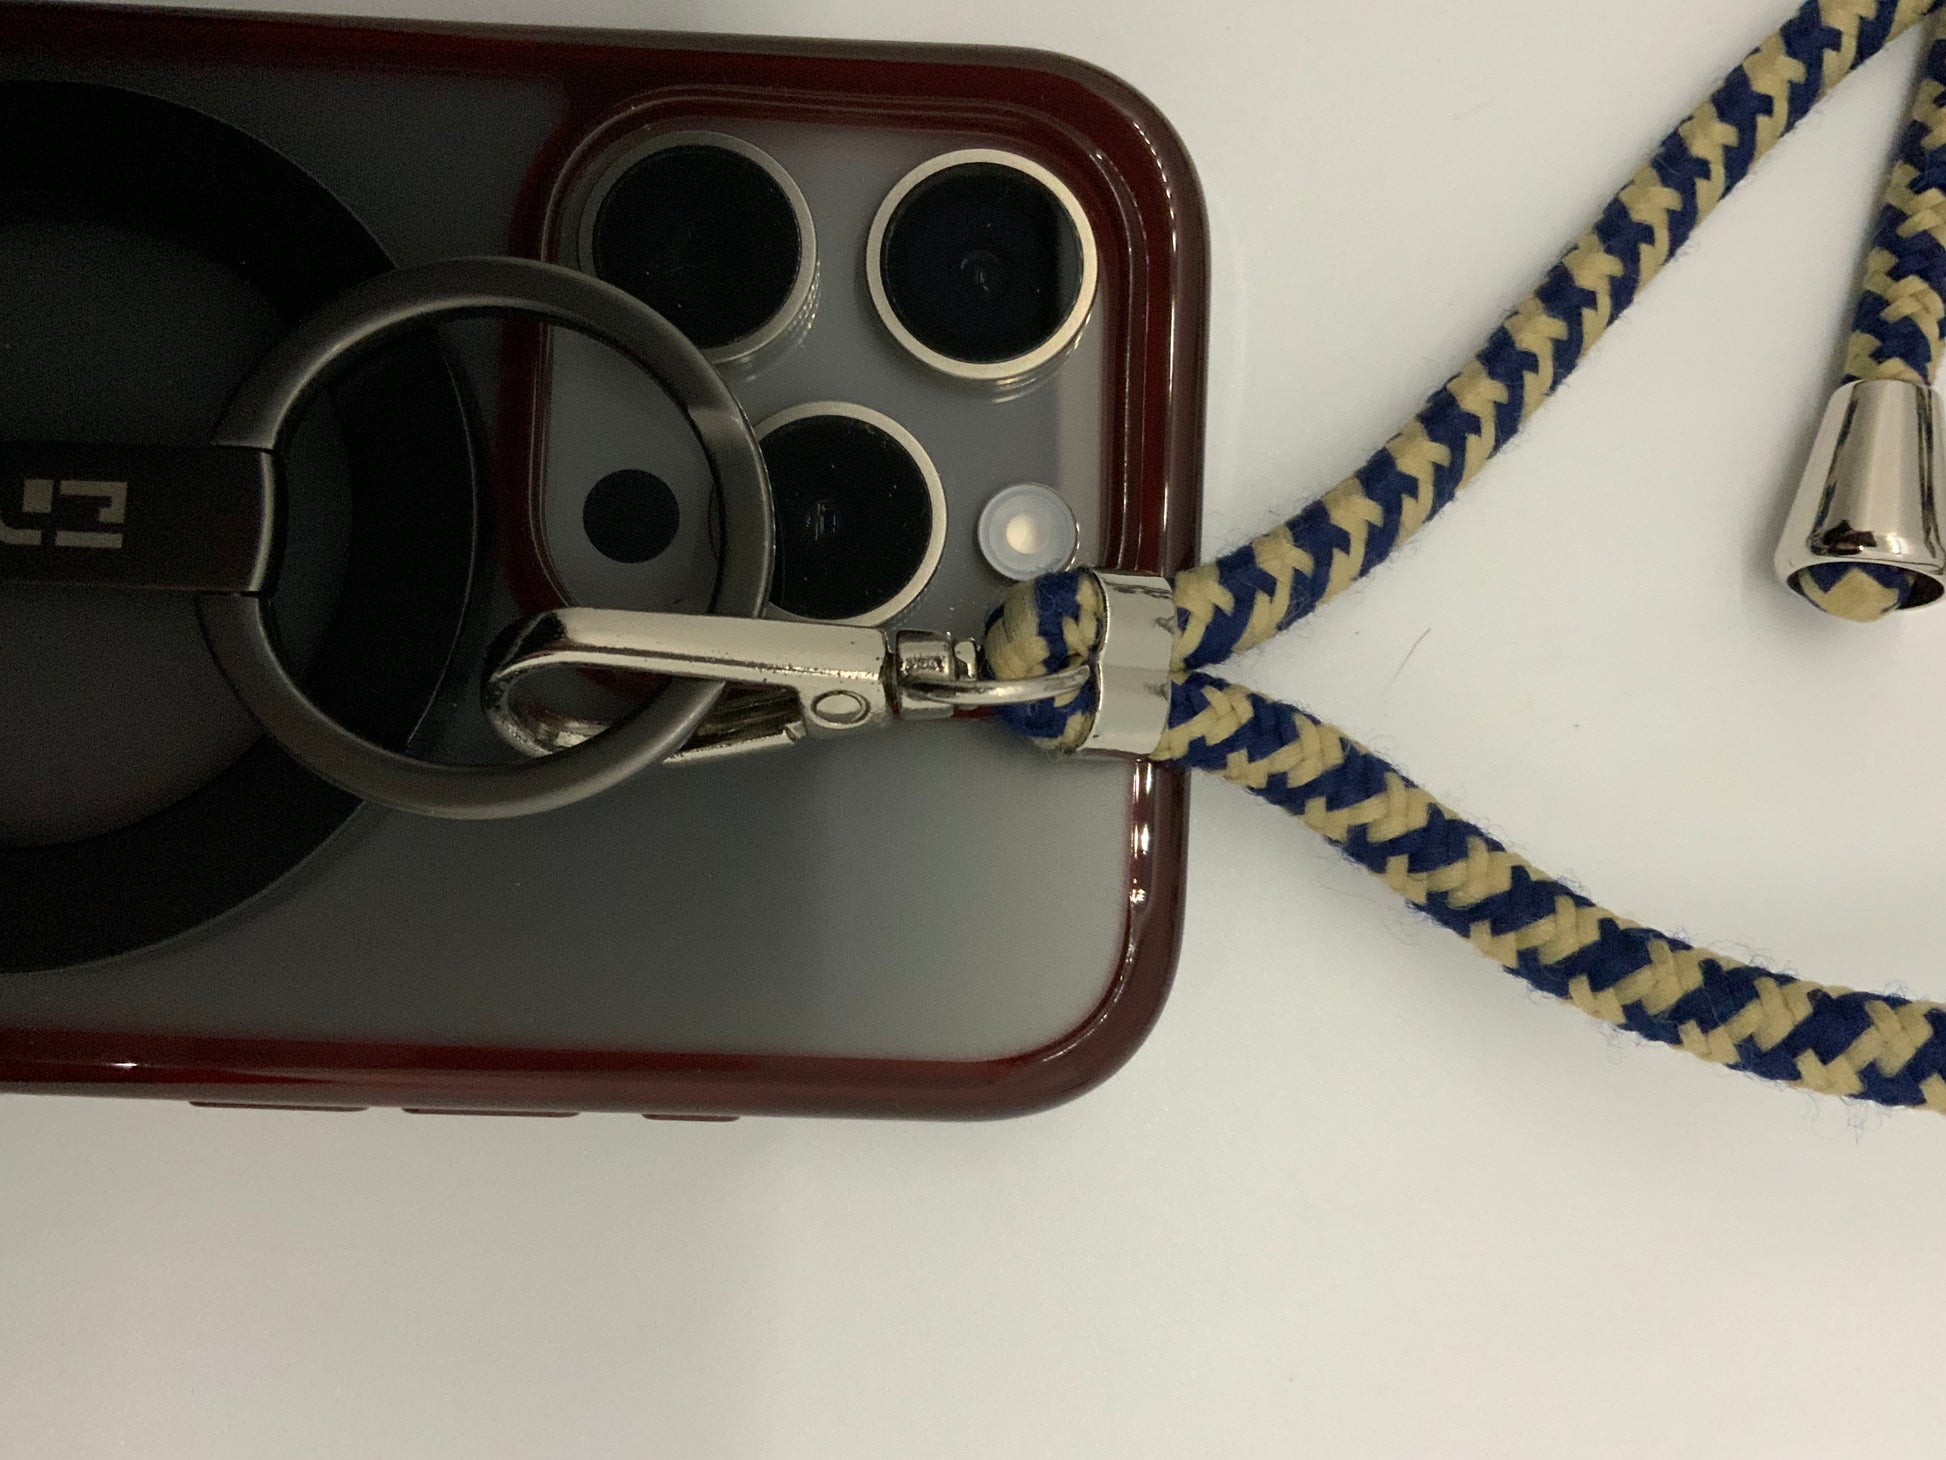 Be My AI: The picture shows a close-up of a few objects. There is a phone with a red case that has a camera with three lenses and a flash in a square arrangement. Attached to the phone case is a black carabiner with a silver clip. The carabiner has the letters "LE" on it. There is also a blue and beige braided cord attached to the silver clip. The cord has a silver bell at the end. The background is white.